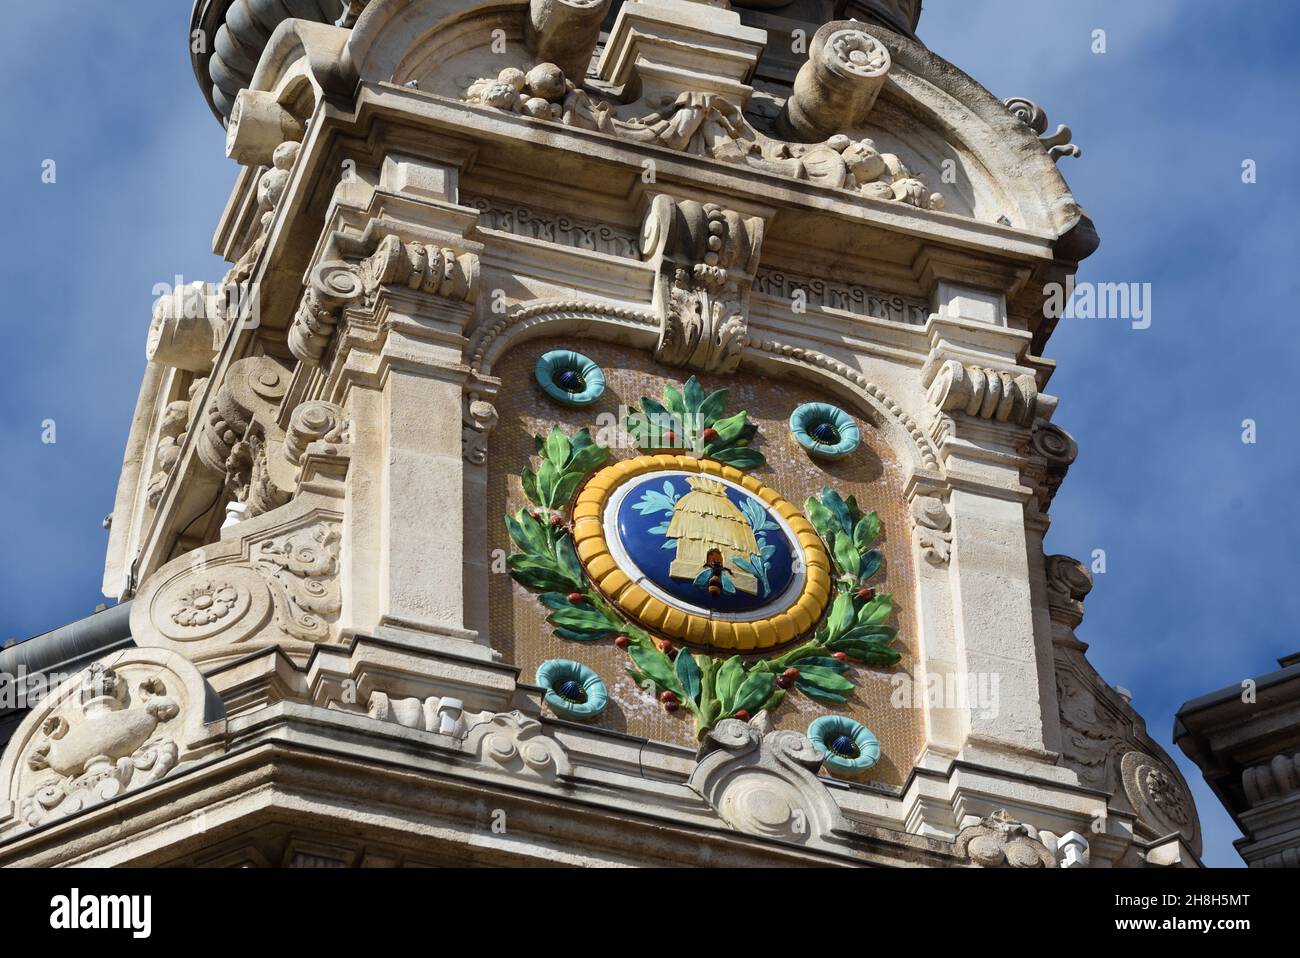 Ceramic Tiles of Beehive Design on Baroque Belfry or Clock Tower of the 1895 Belle Epopue-Style Tribunal Administratif Toulon Var Provence France Stock Photo